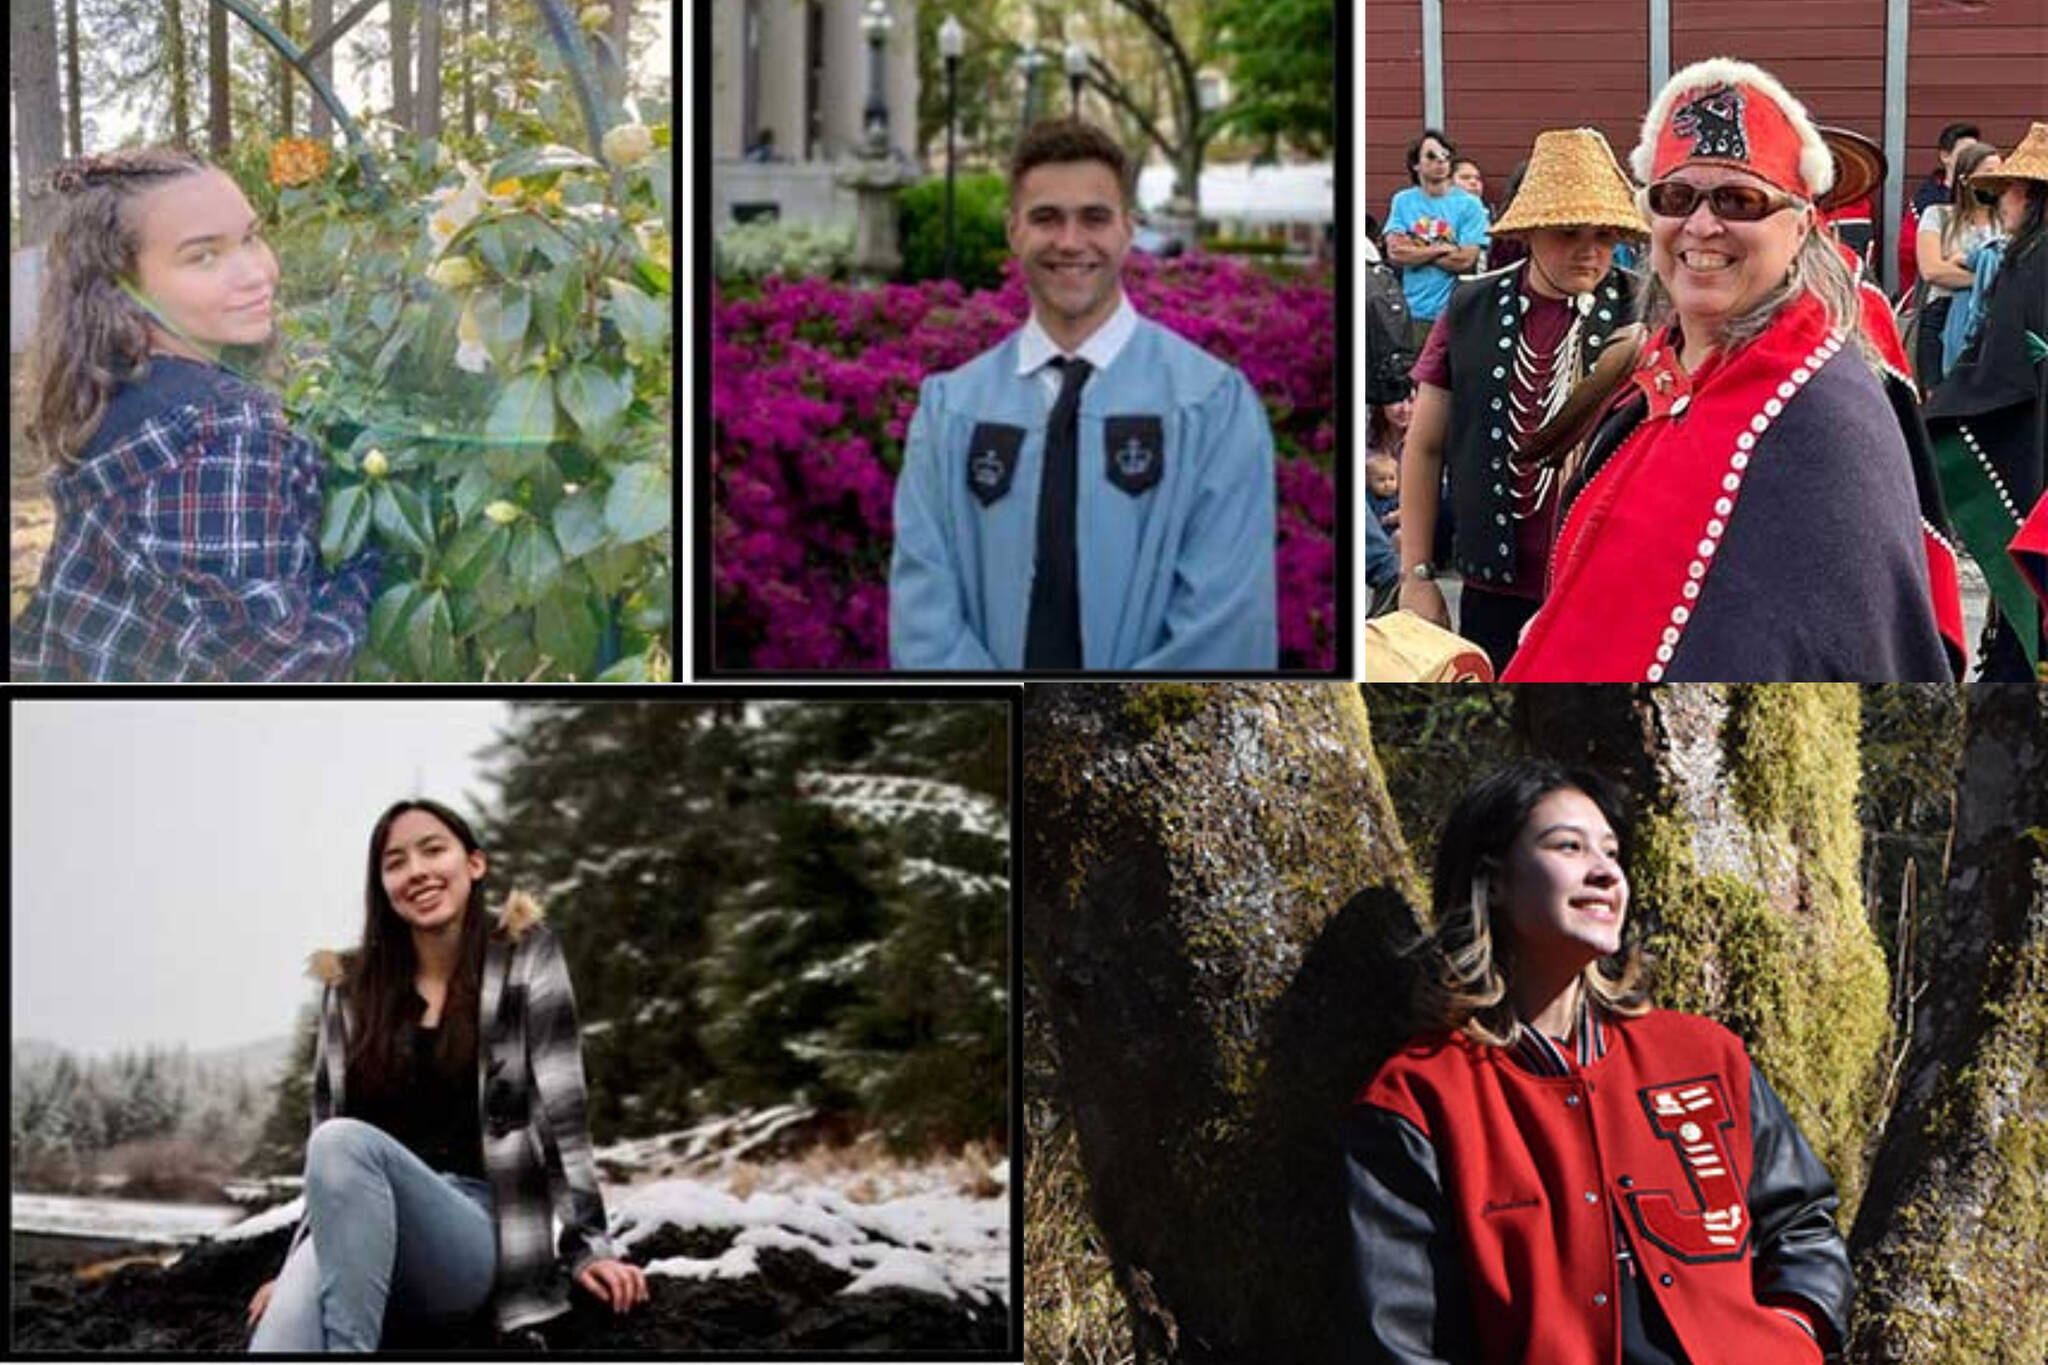 This combination image shows Ethel Lund Visionaries in Healthcare Scholarship recipients Delainey Steffe, Michael David Del Cesar, Gloria Eyon, Chariety Moler and Trinity Jackson. The scholarship offers funds to Southeast Alaska Native students pursuing studies in the health care field. (Courtesy Photos / Healing Hand Foundation)